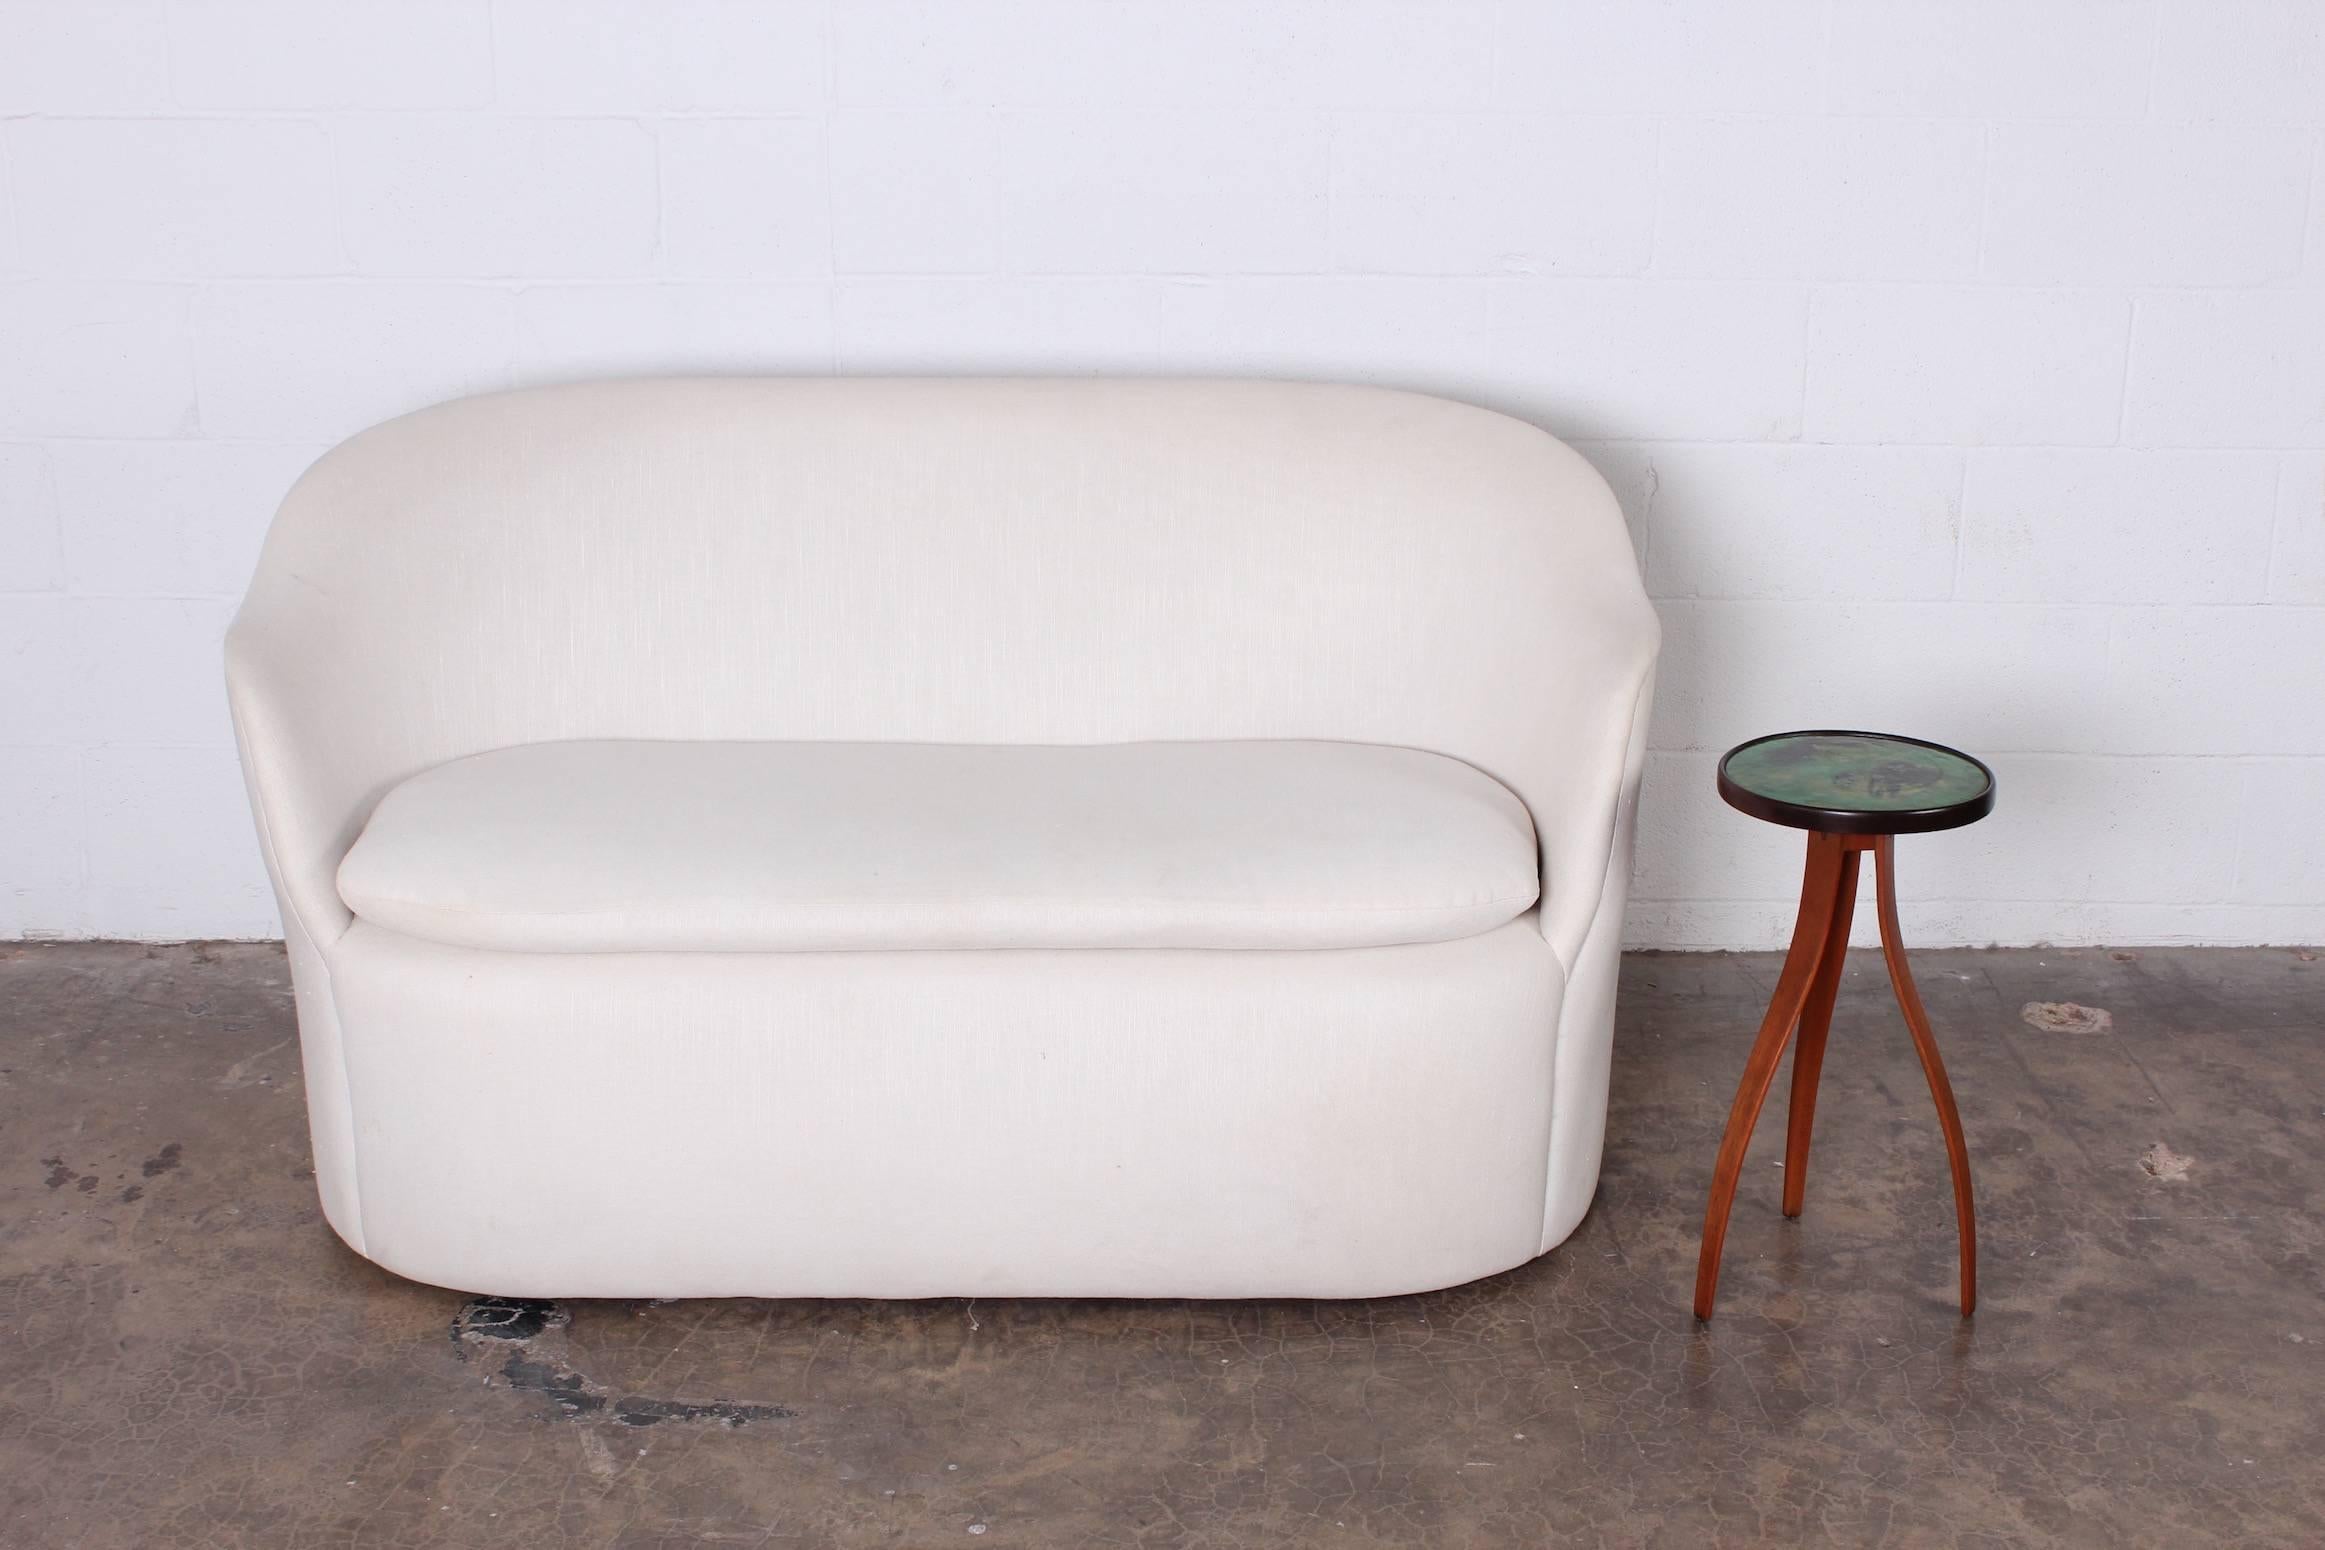 A small-scale sofa designed by John Saladino for Dunbar. Matching chair also available.